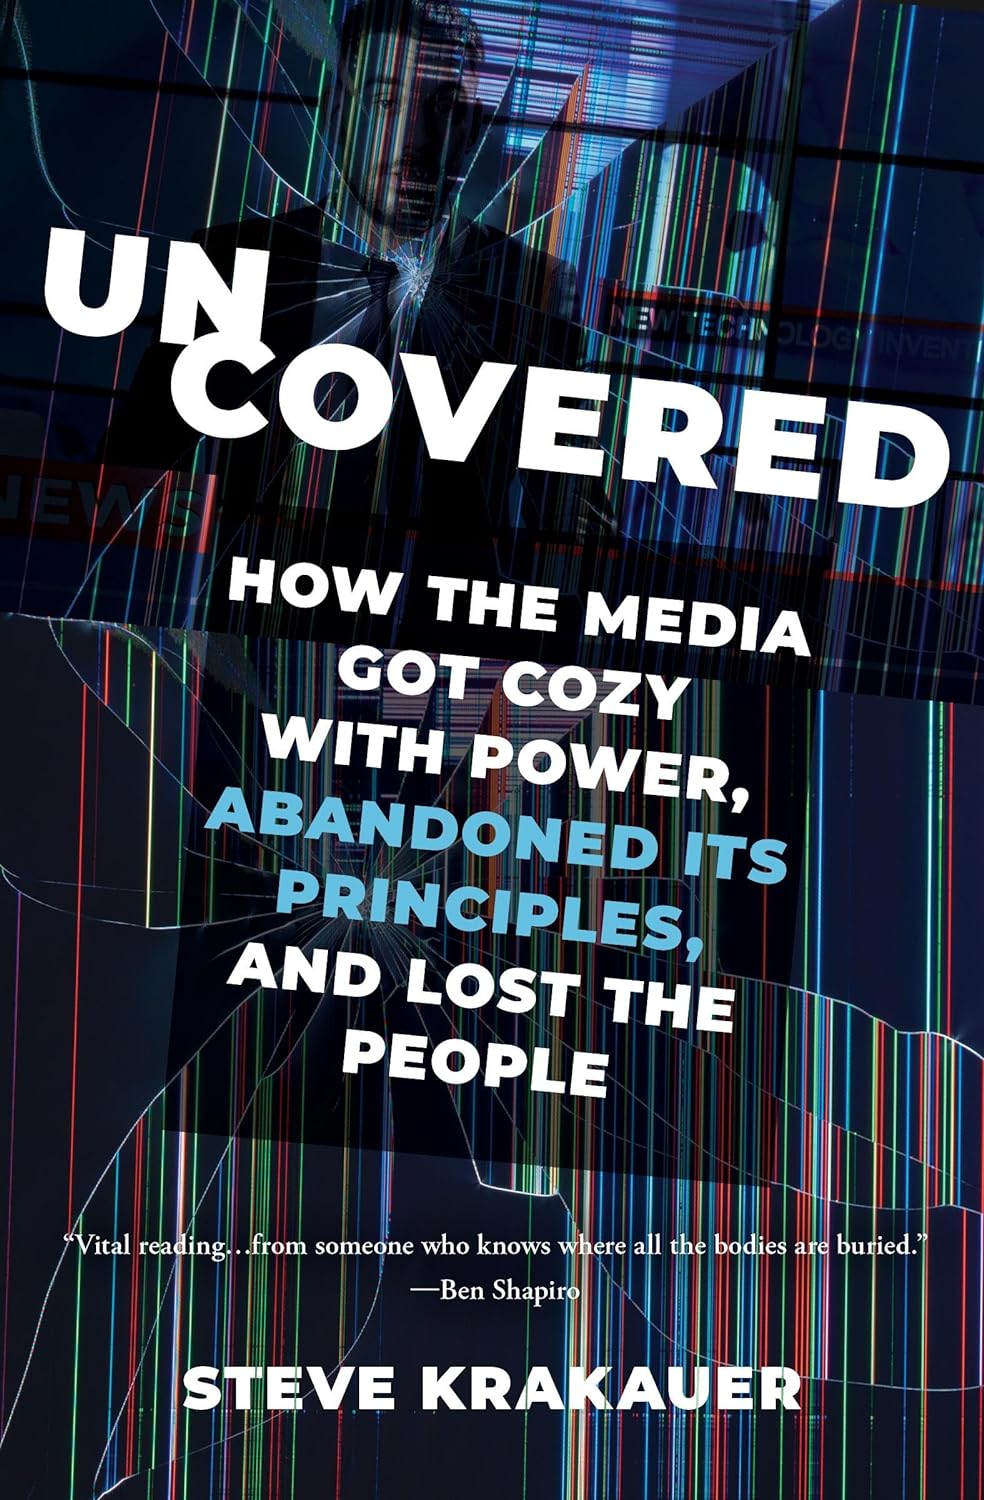 Uncovered: How the Media Got Cozy with Power, Abandoned Its Principles, and Lost the People Thumbnail